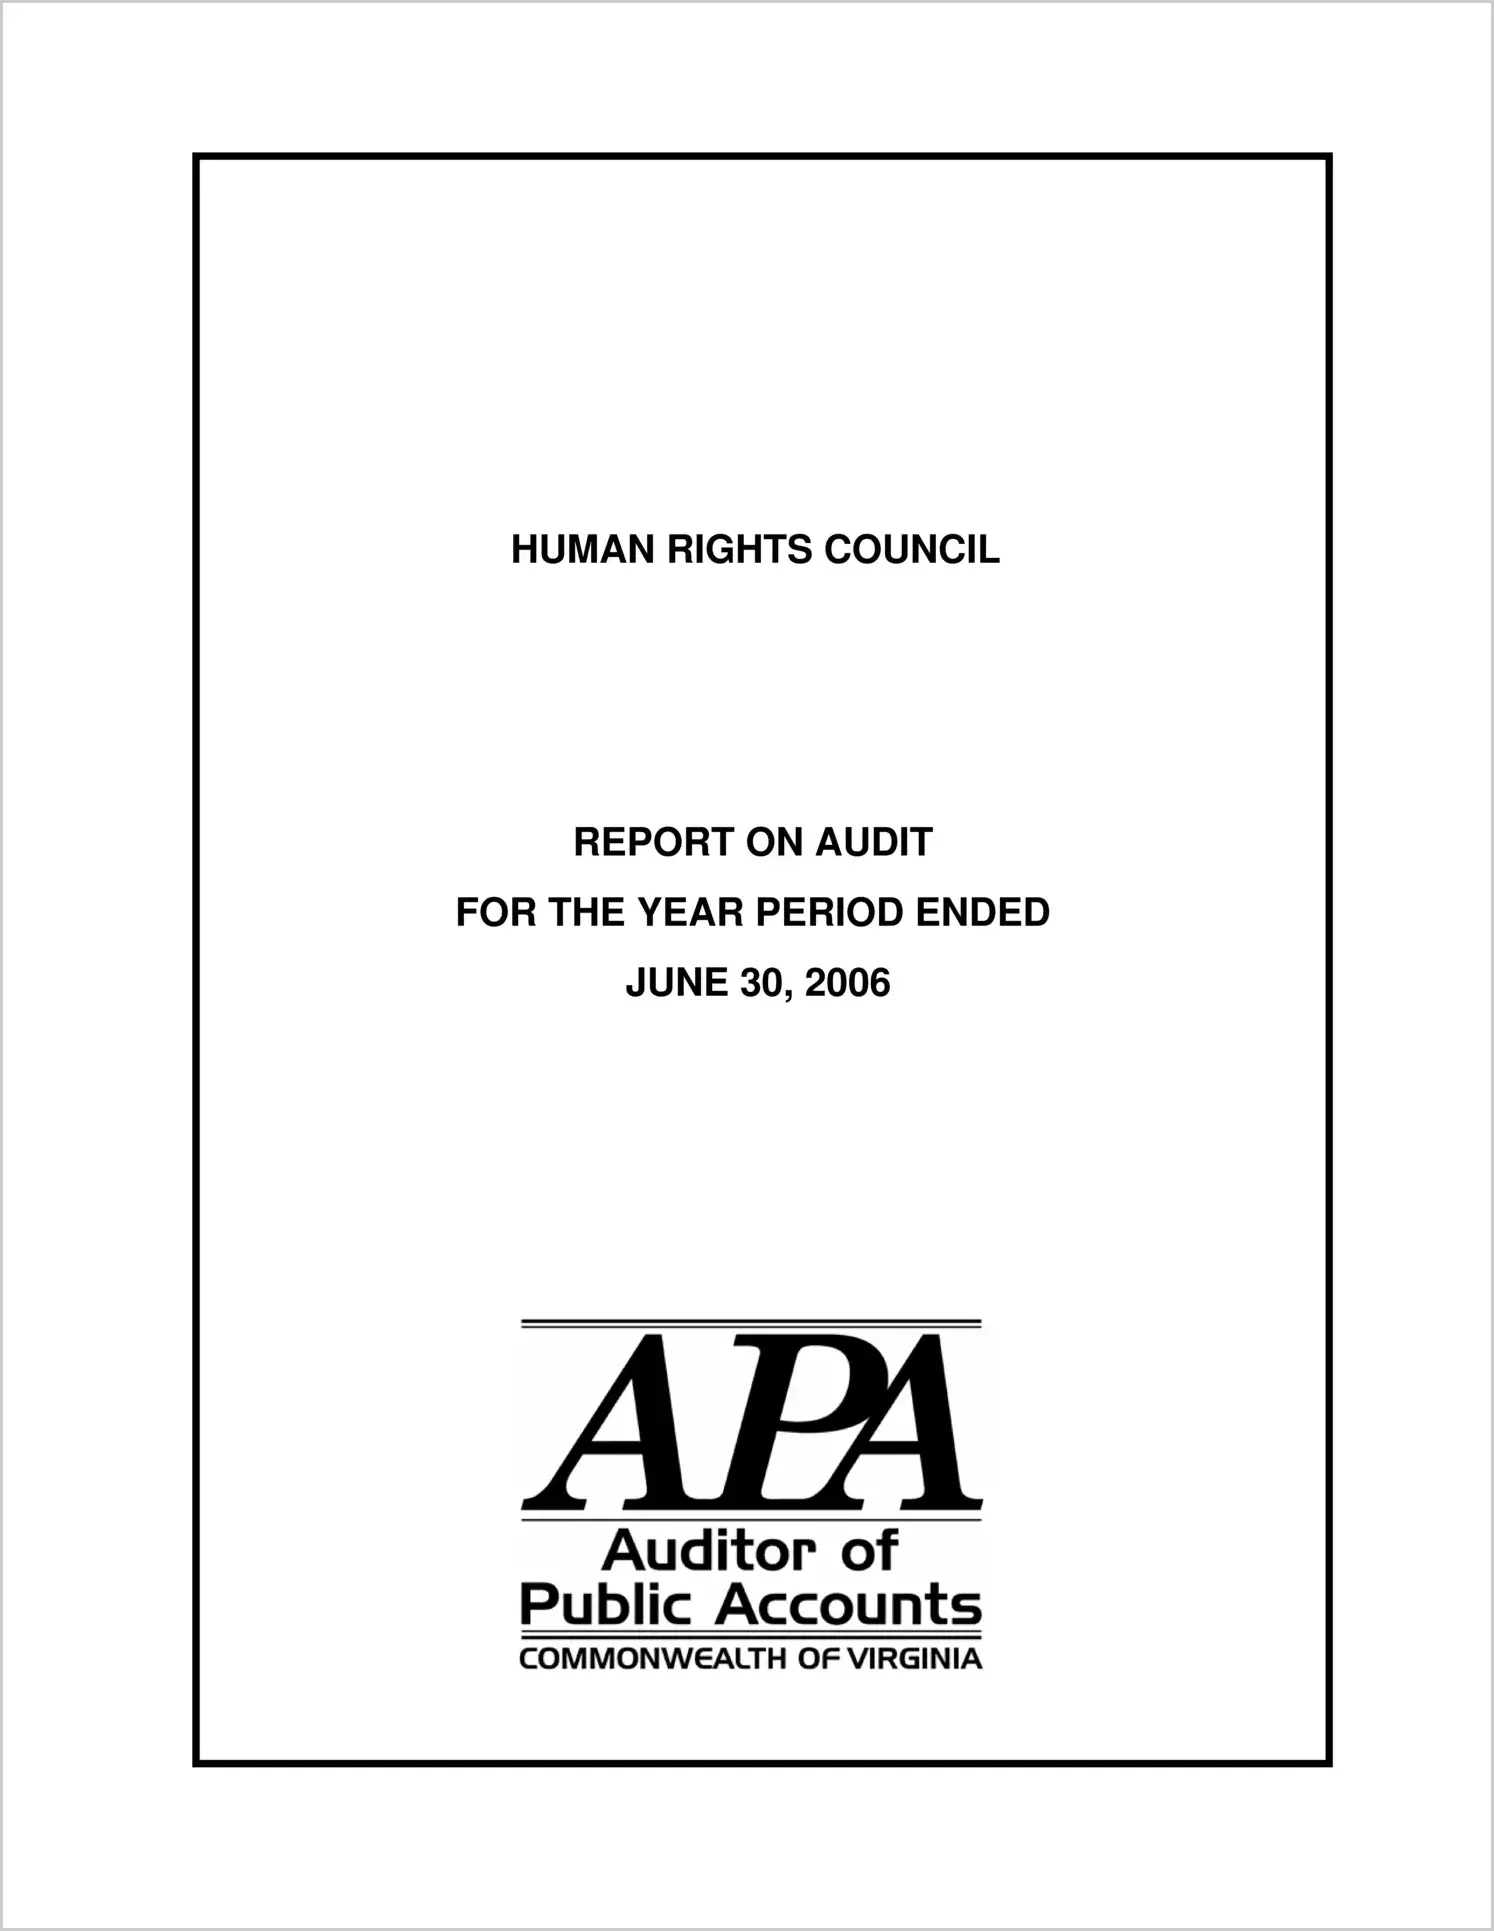 Human Rights Council for the two-year period ended June 30, 2006